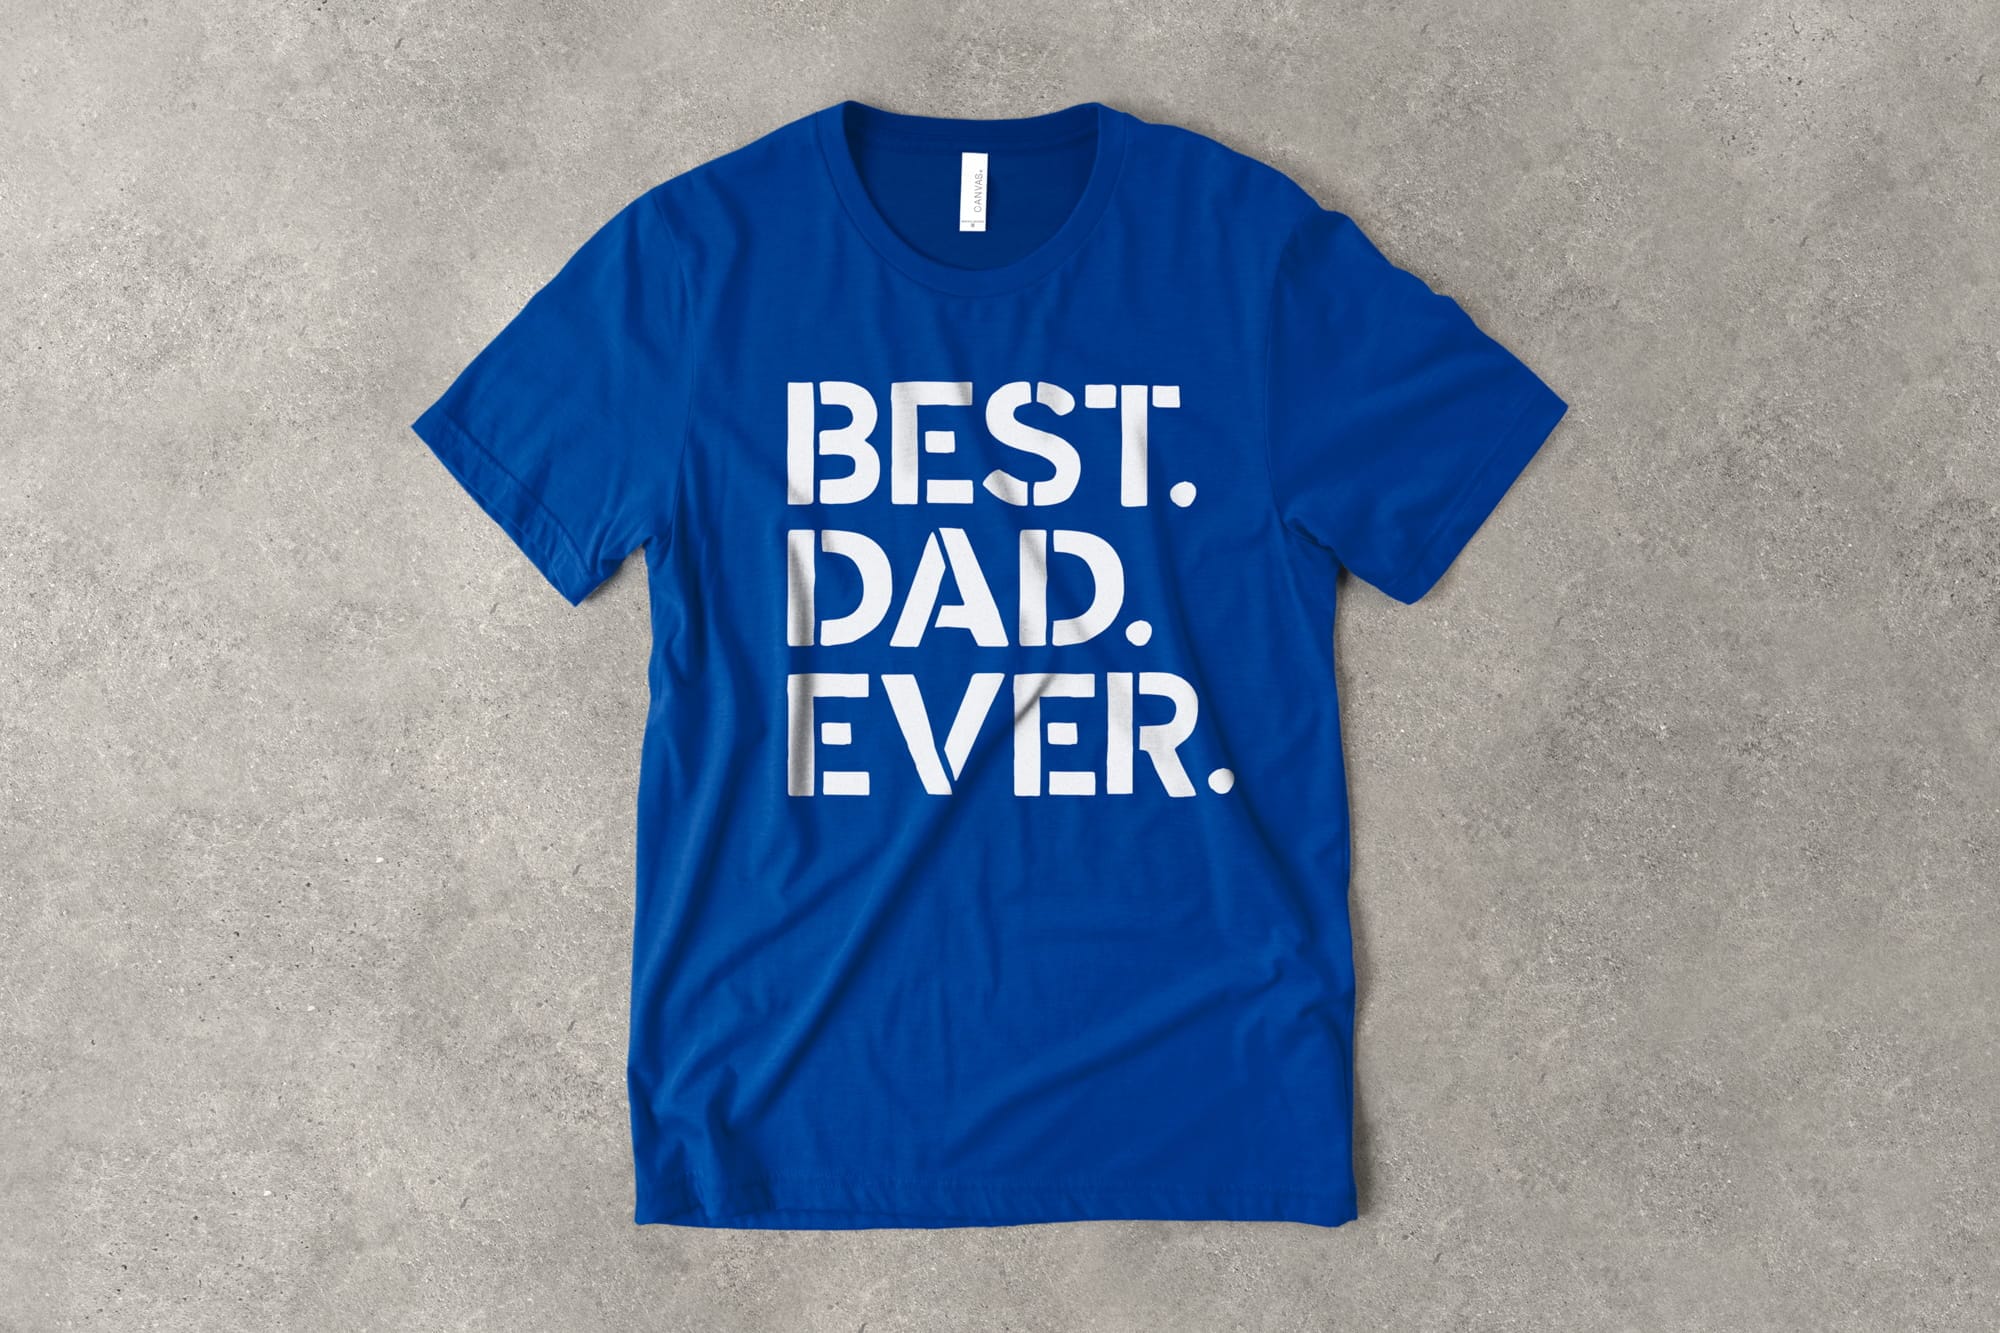 A flat t-shirt that has a customizable design that says "Best. Dad. Ever."